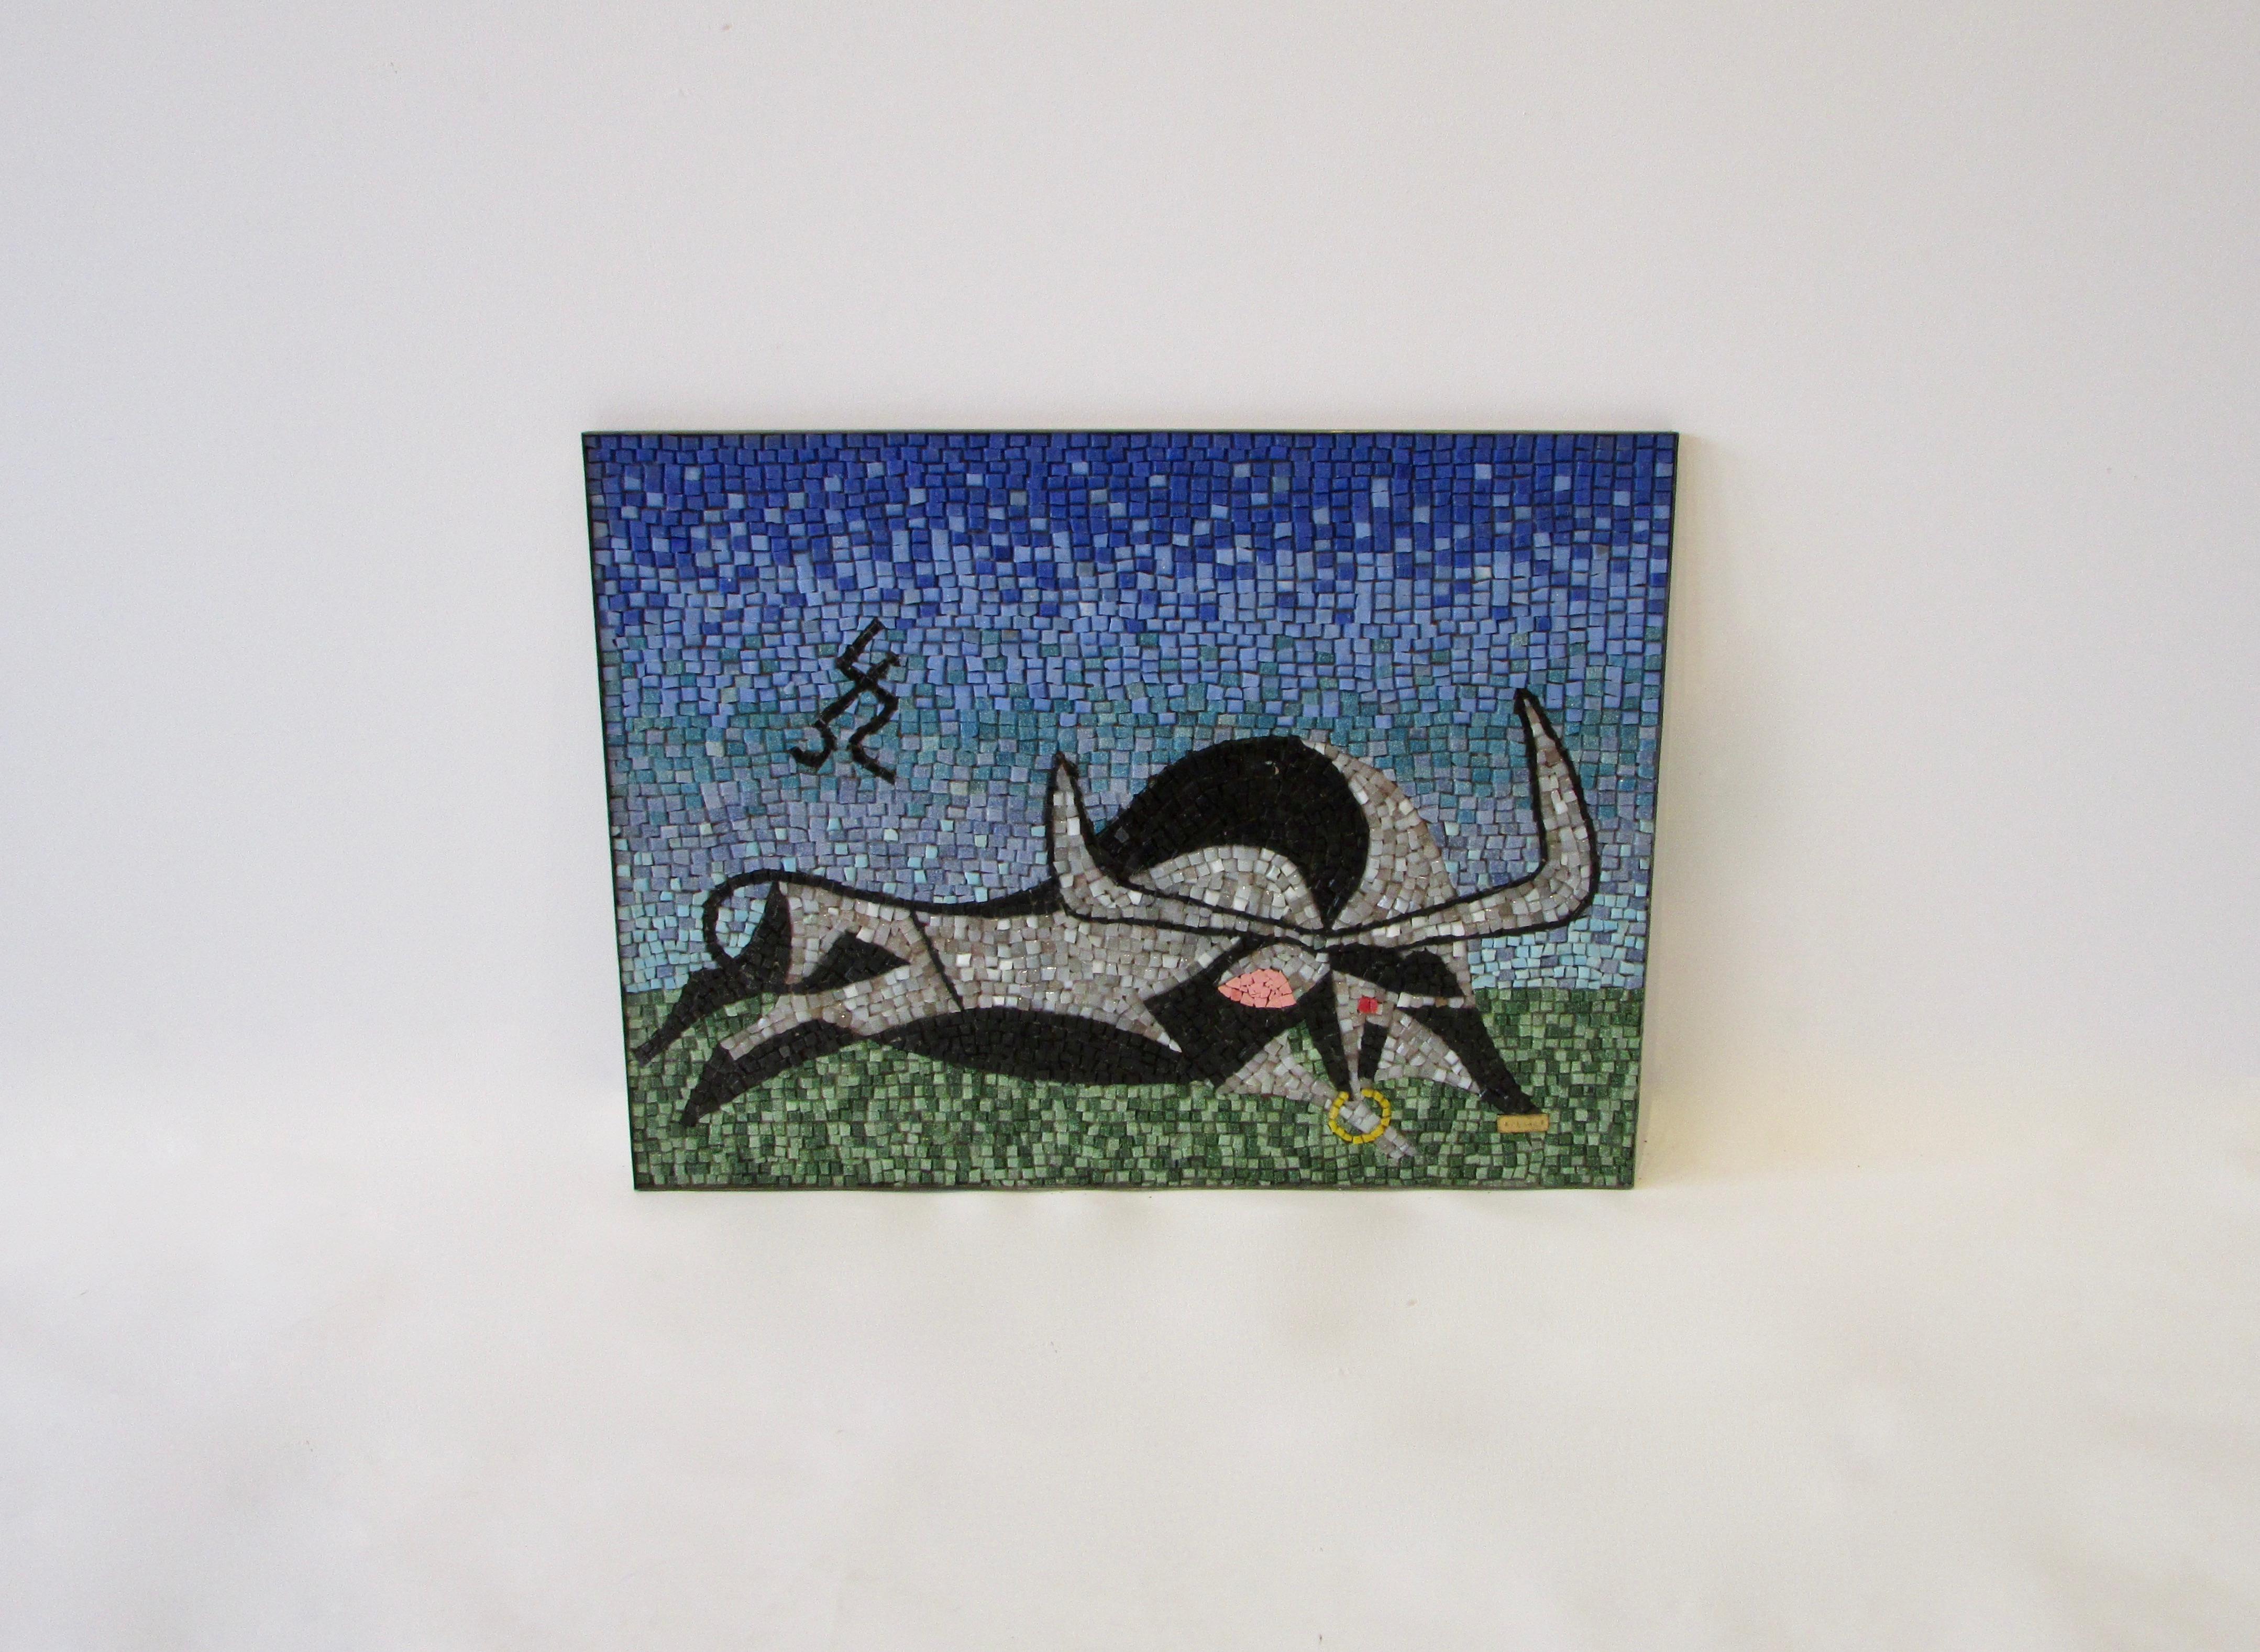 Mid-Century Modern Large Blue Green with Black, Grey Glass Mosaic Tile Wall Plaque Depicting Bull